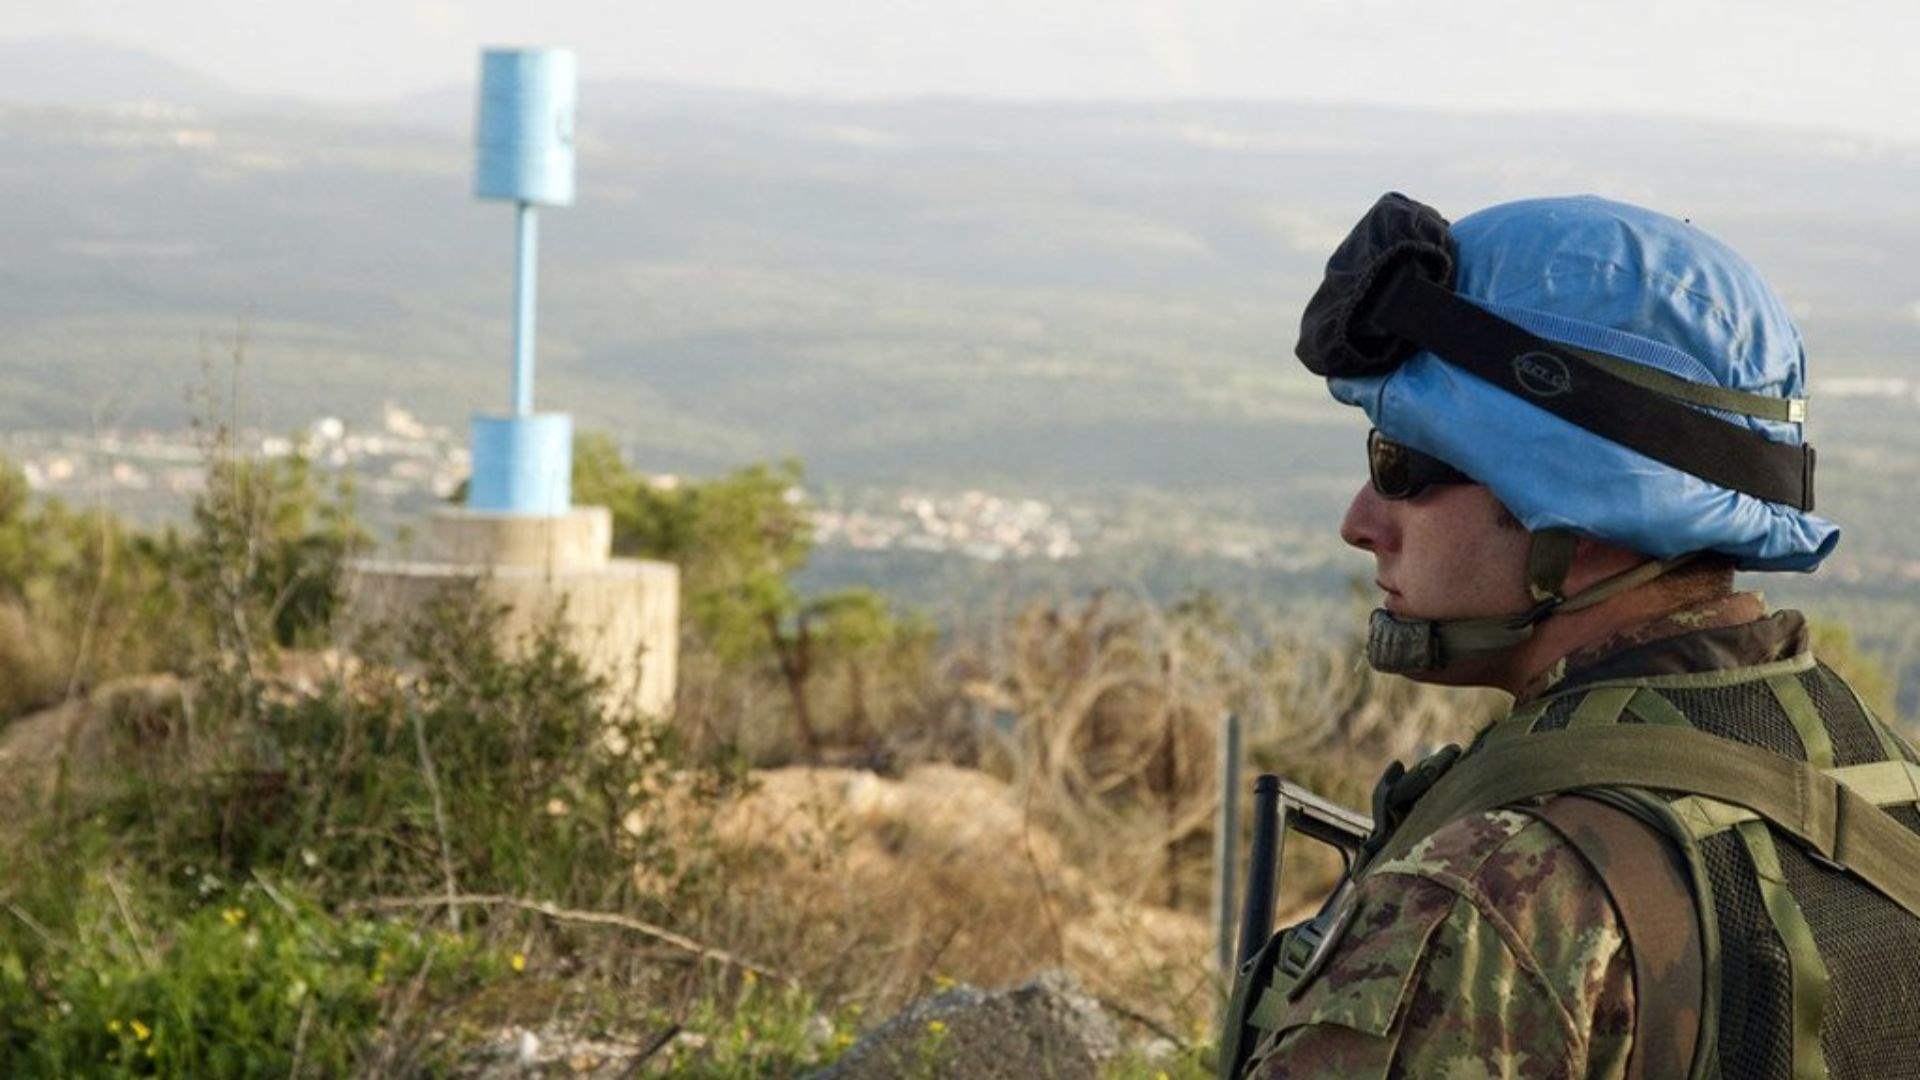 UNIFIL urges coordination along Blue Line to avoid actions that could cause tensions  